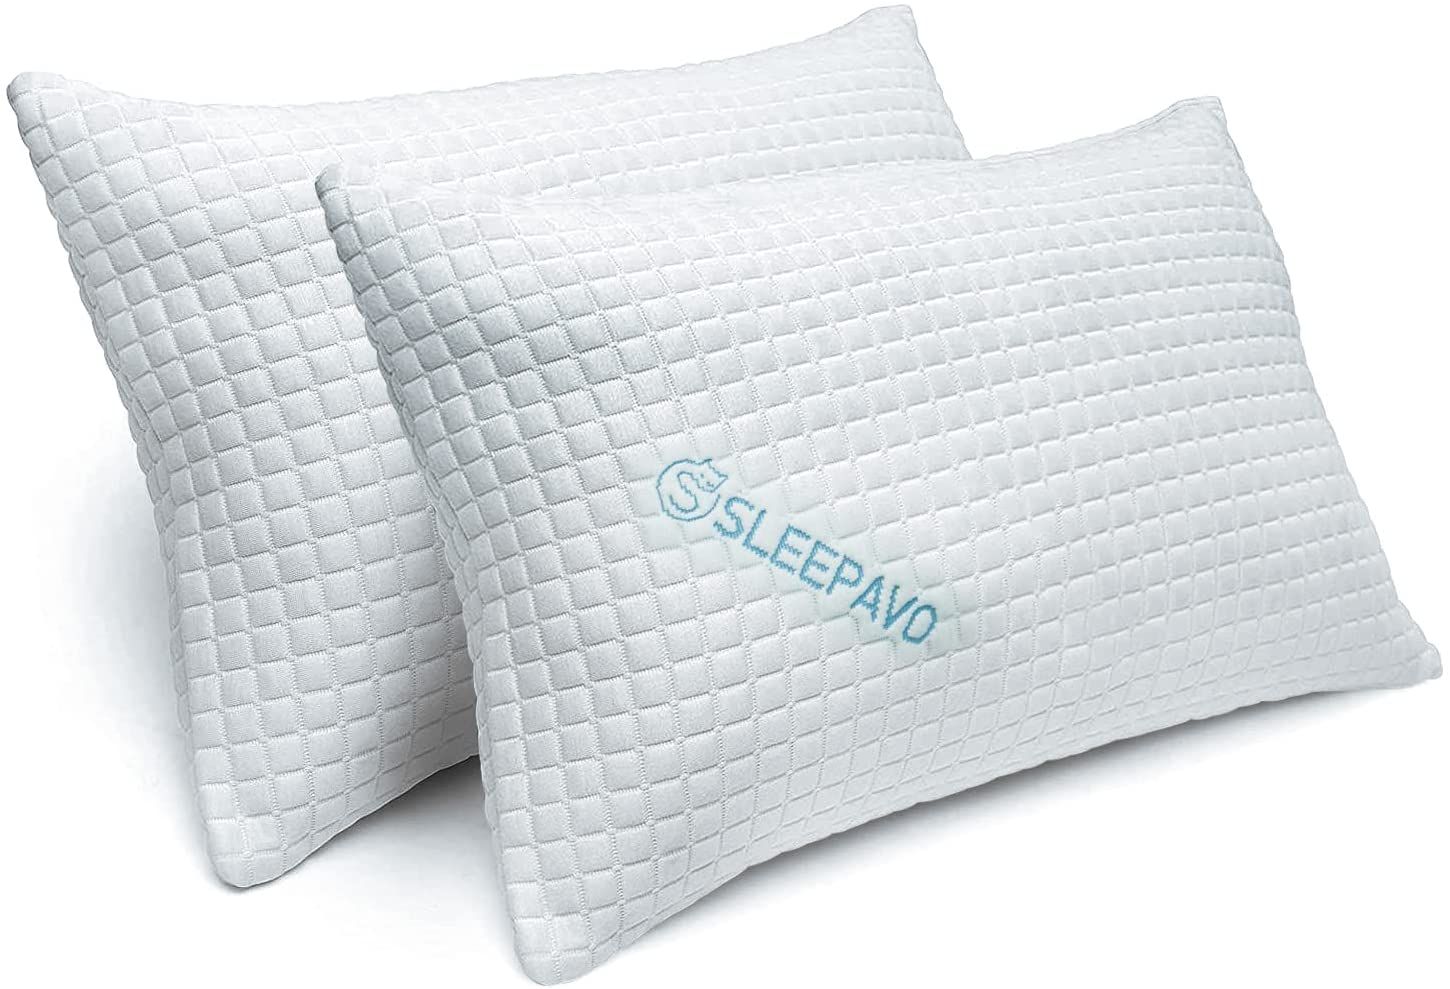 Memory Foam Pillows Queen Size Set of 2 - Bamboo Cooling Bed Pillows for Sleeping for Stomach, Back and Side Sleeper - Firm Cool Shredded Memory Foam Pillows 2 Pack Queen Pillows Sets - Memory Pillow